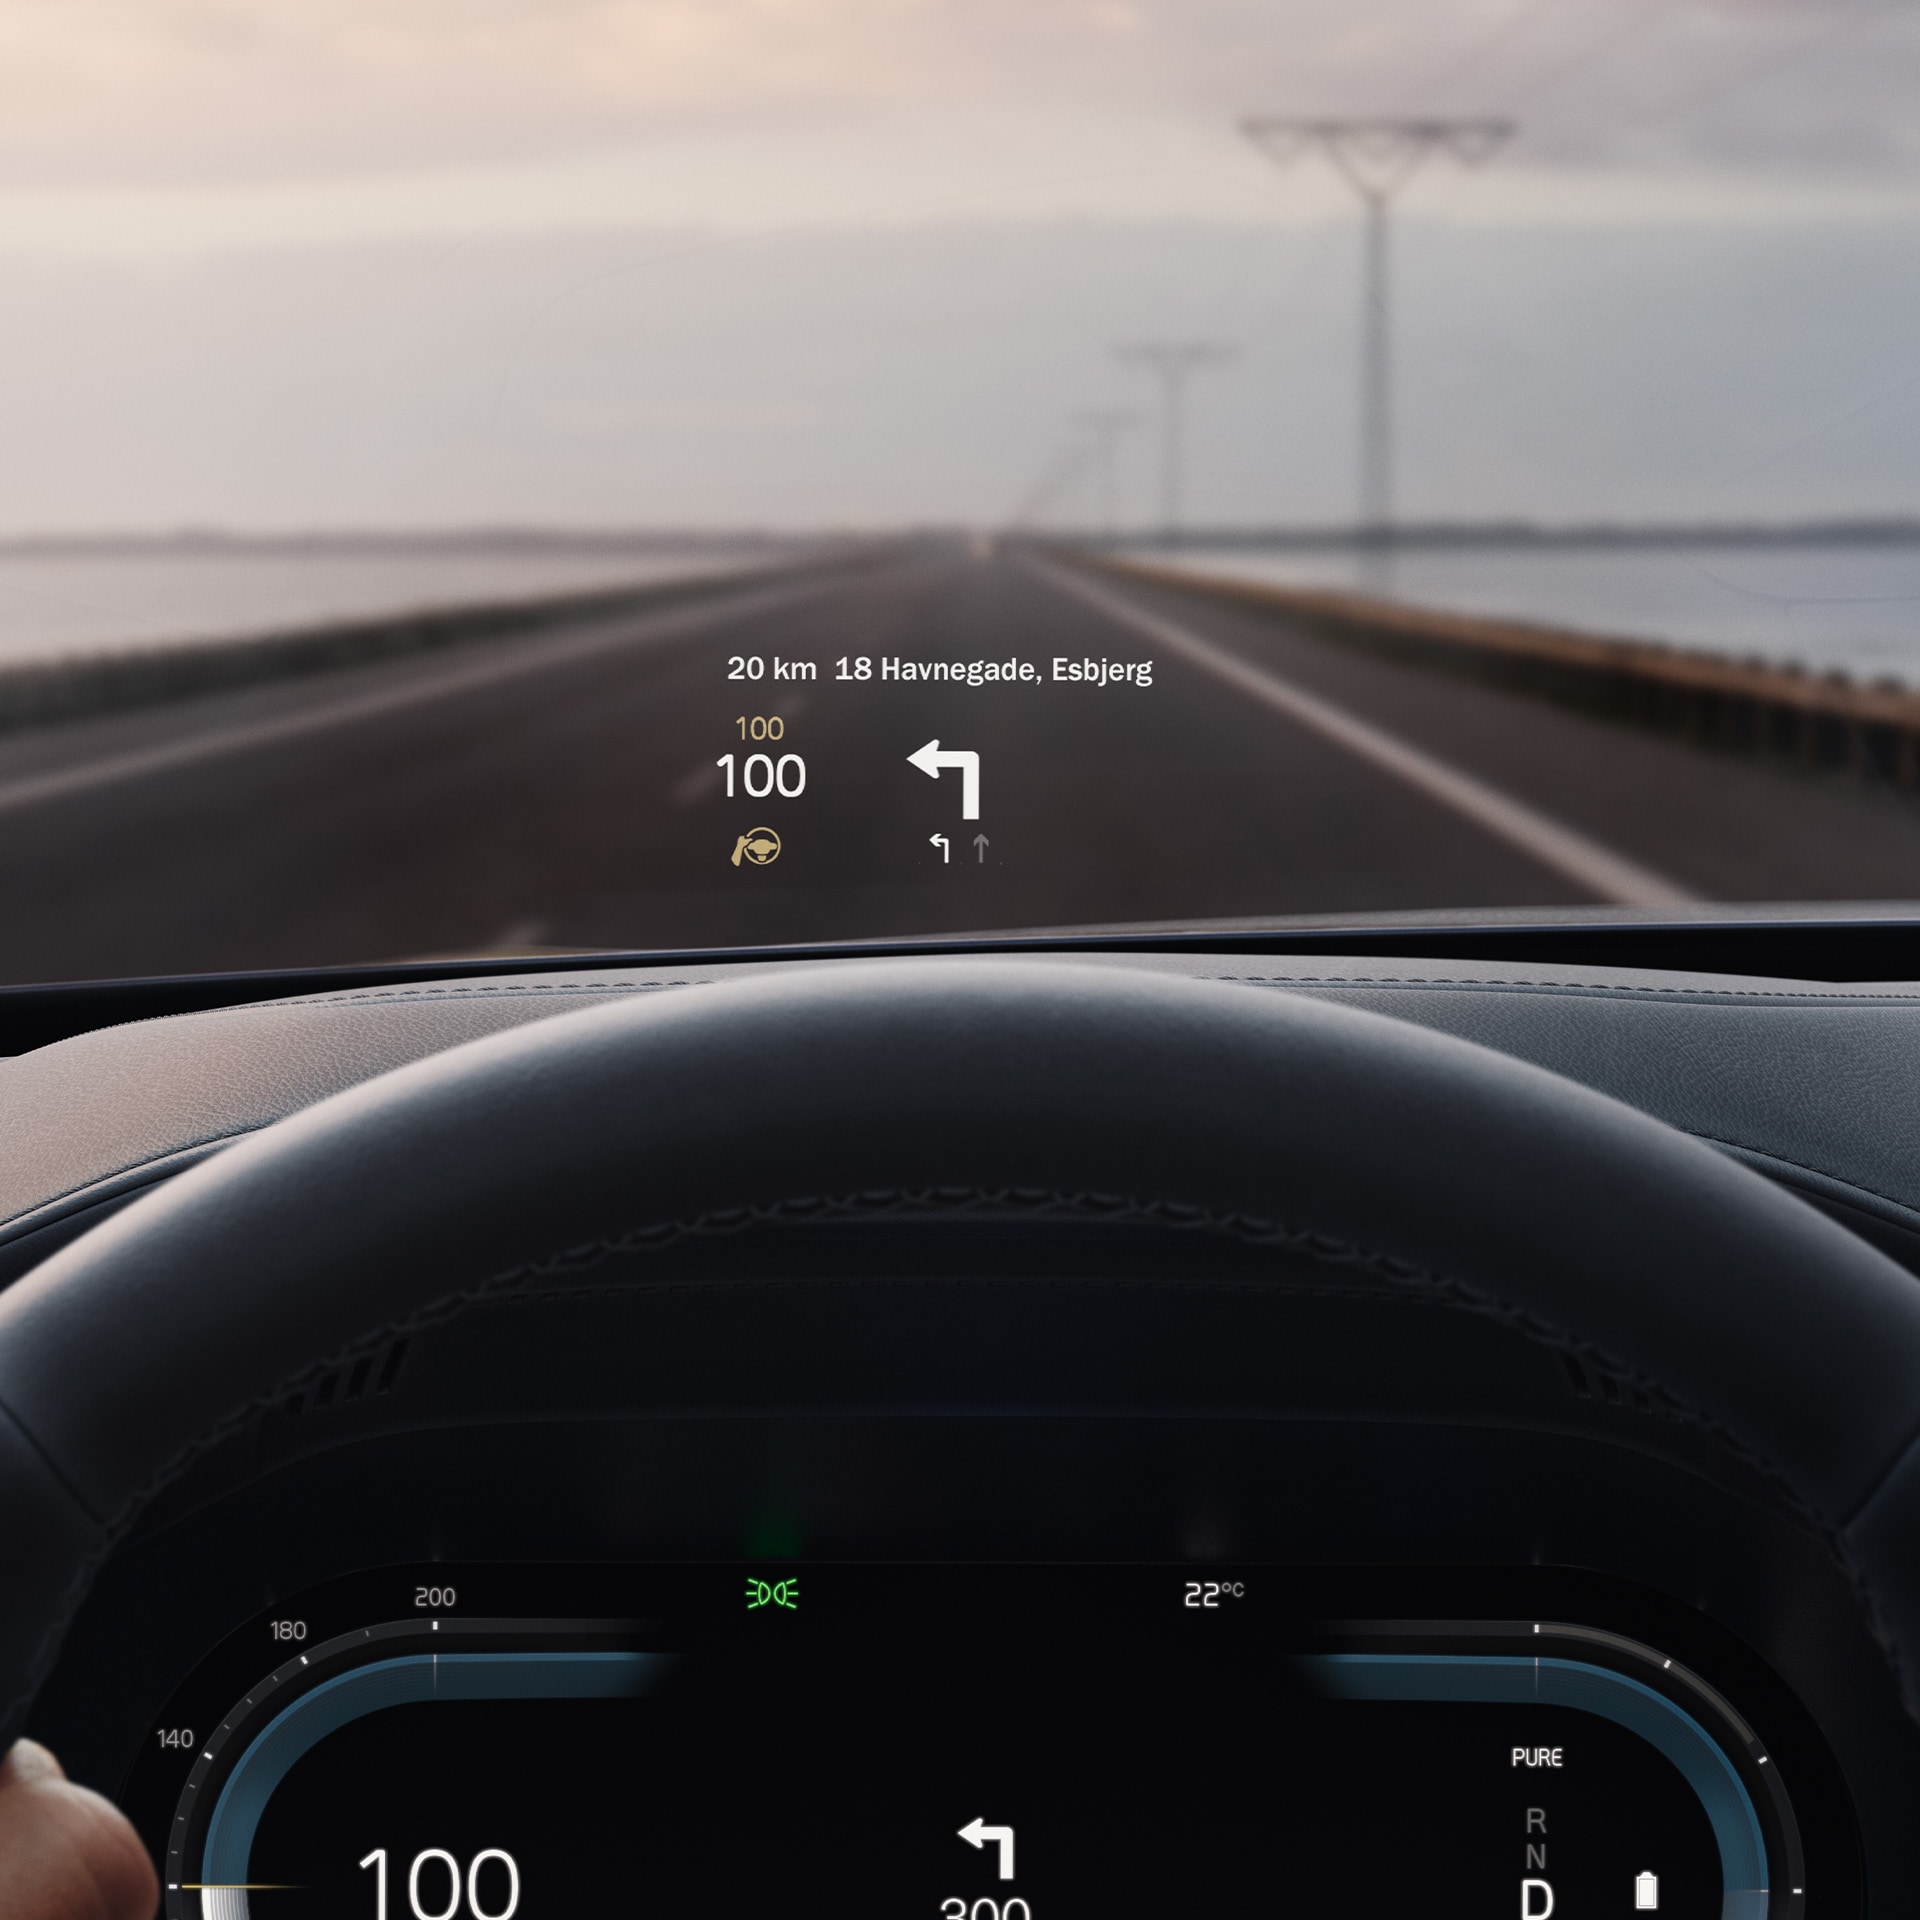 Inside a Volvo, head-up display showing driving speed and navigation on the windshield. 